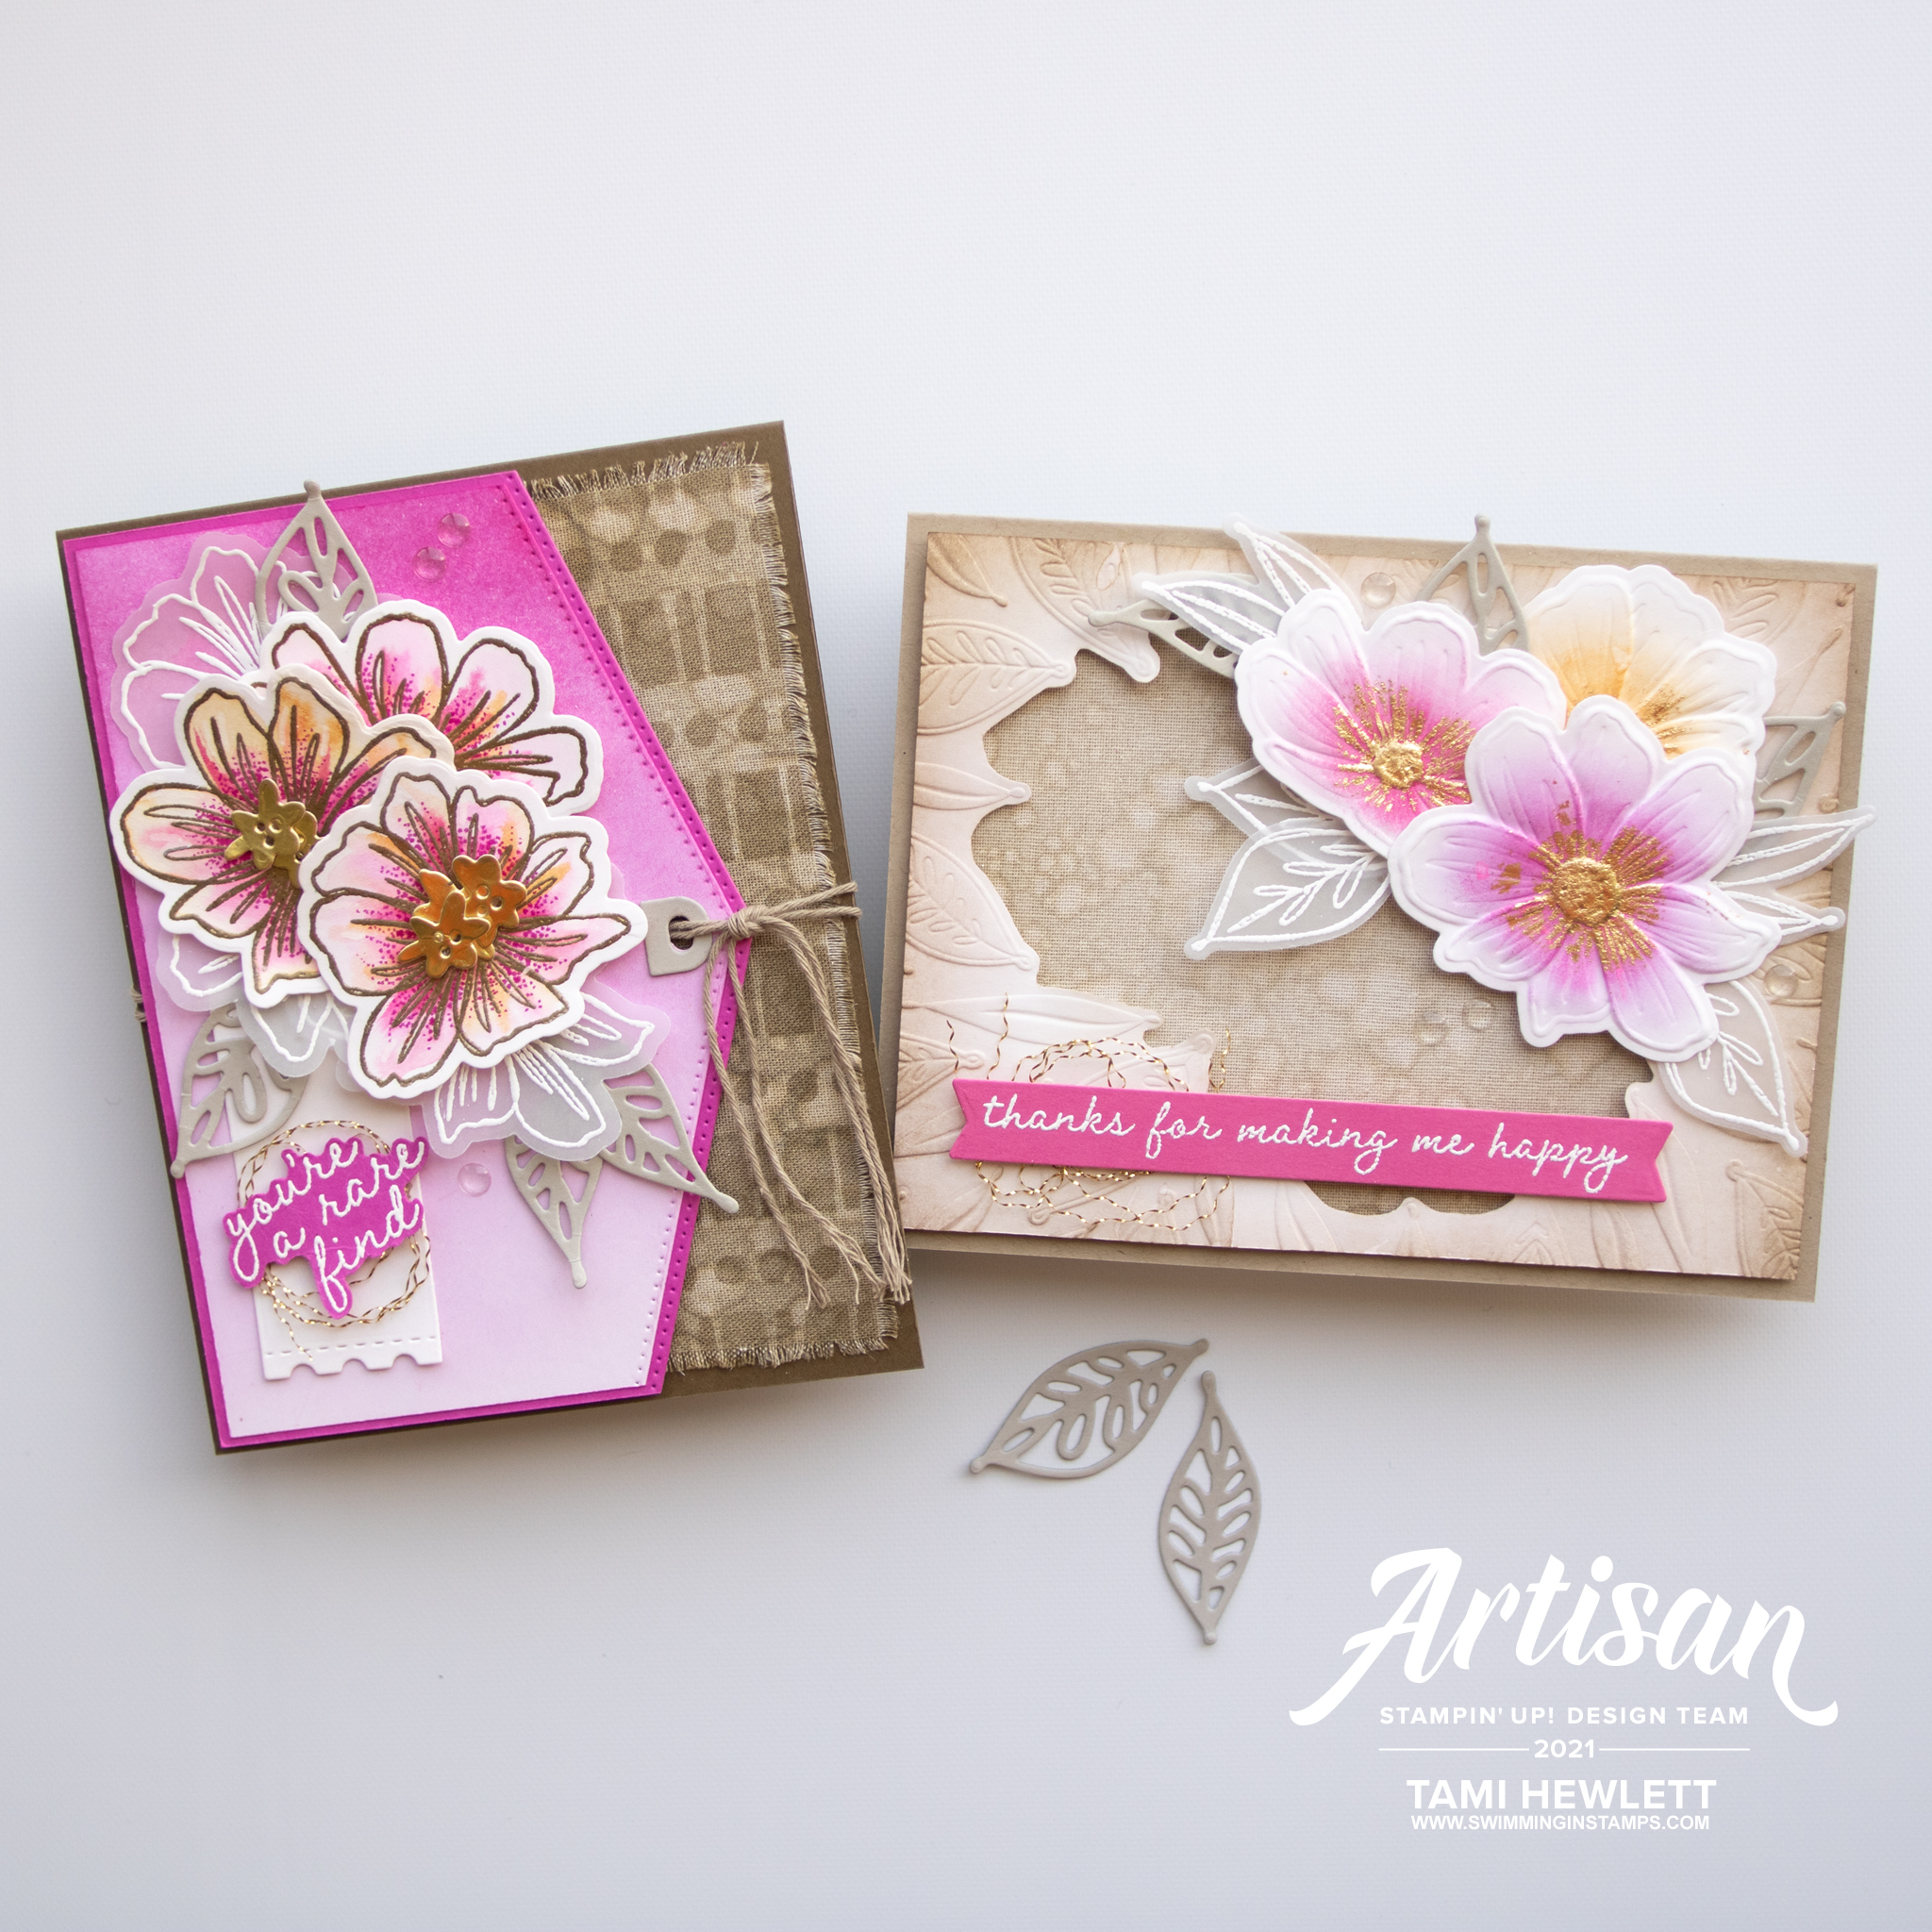 Three New 3D Embossing Folders From Stampin' Up! - Lola Rist